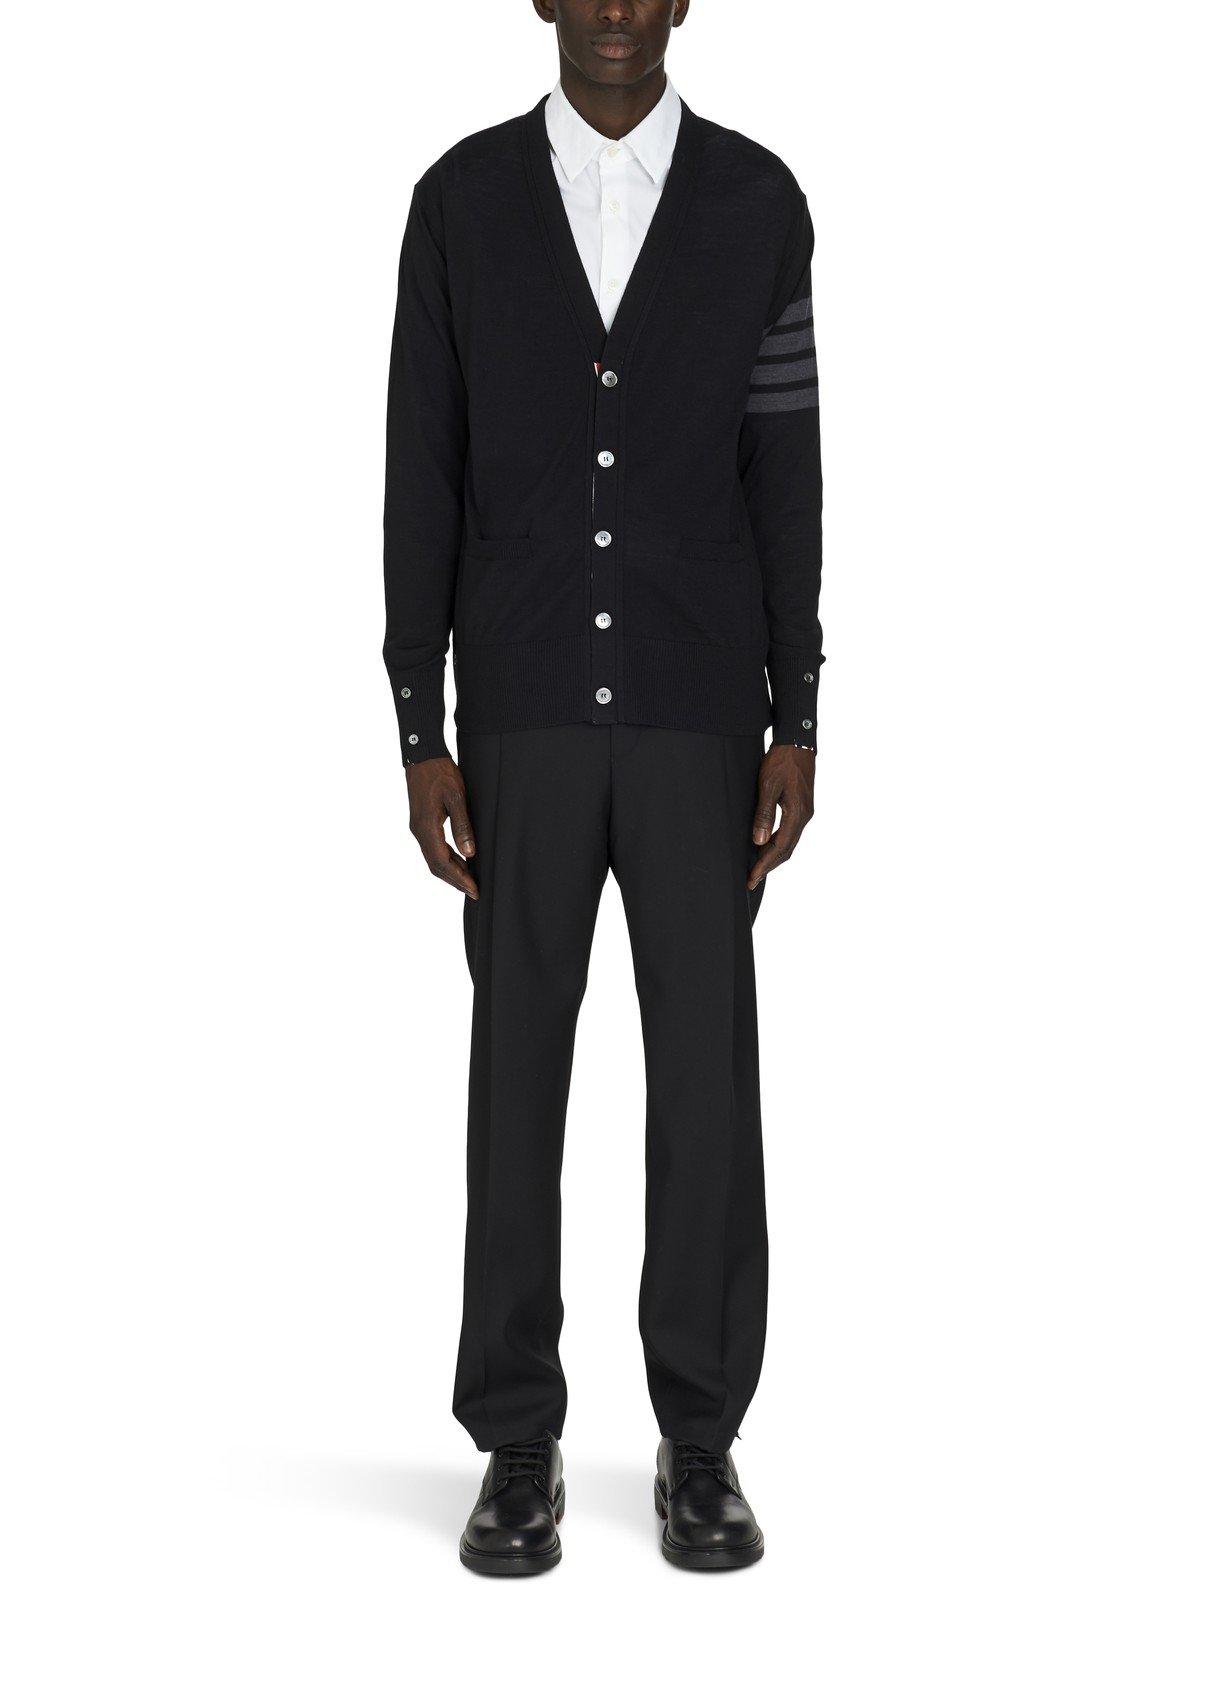 buttoned cardigan by Thom Browne